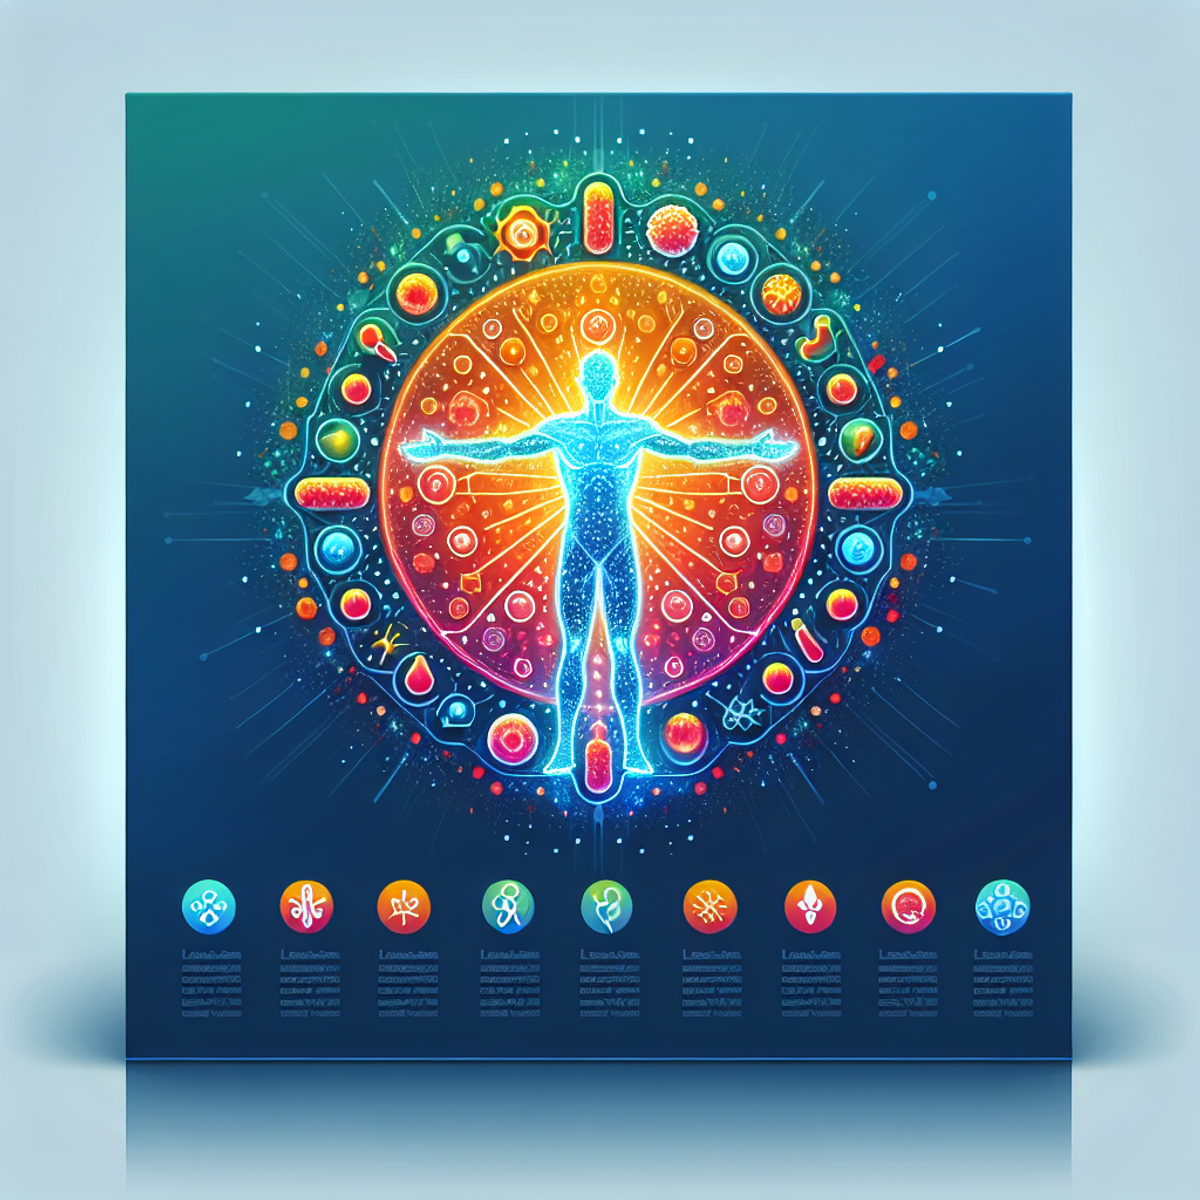 A glowing and vibrant illustration of the human immune system, featuring symbols of T-cells, antibodies, and white blood cells.